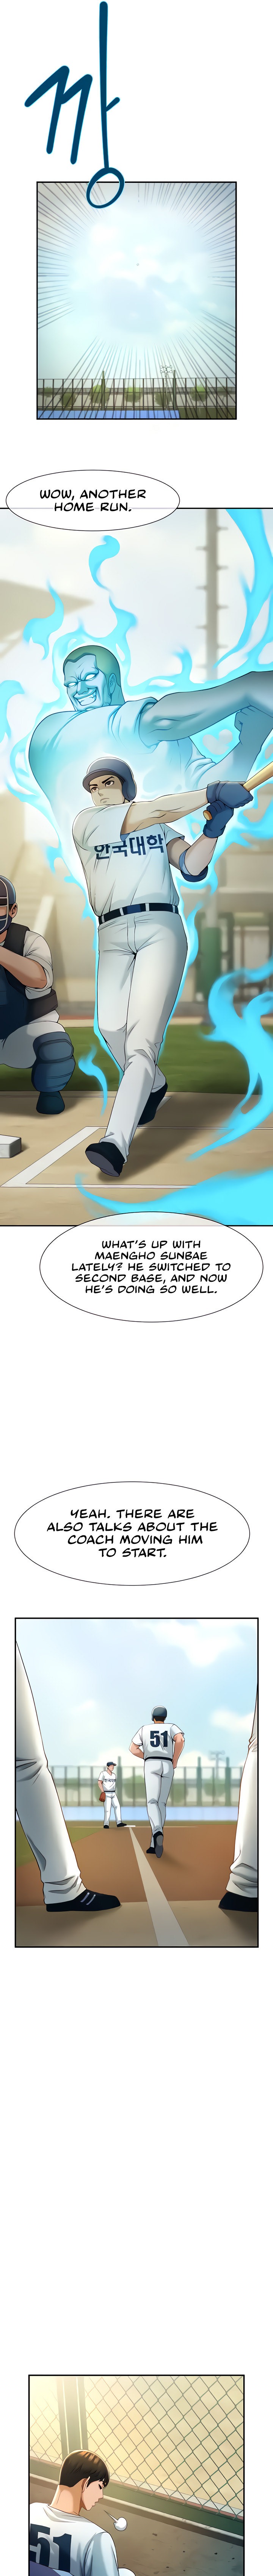 The Cheat Code Hitter Fucks Them All - Chapter 4 Page 7